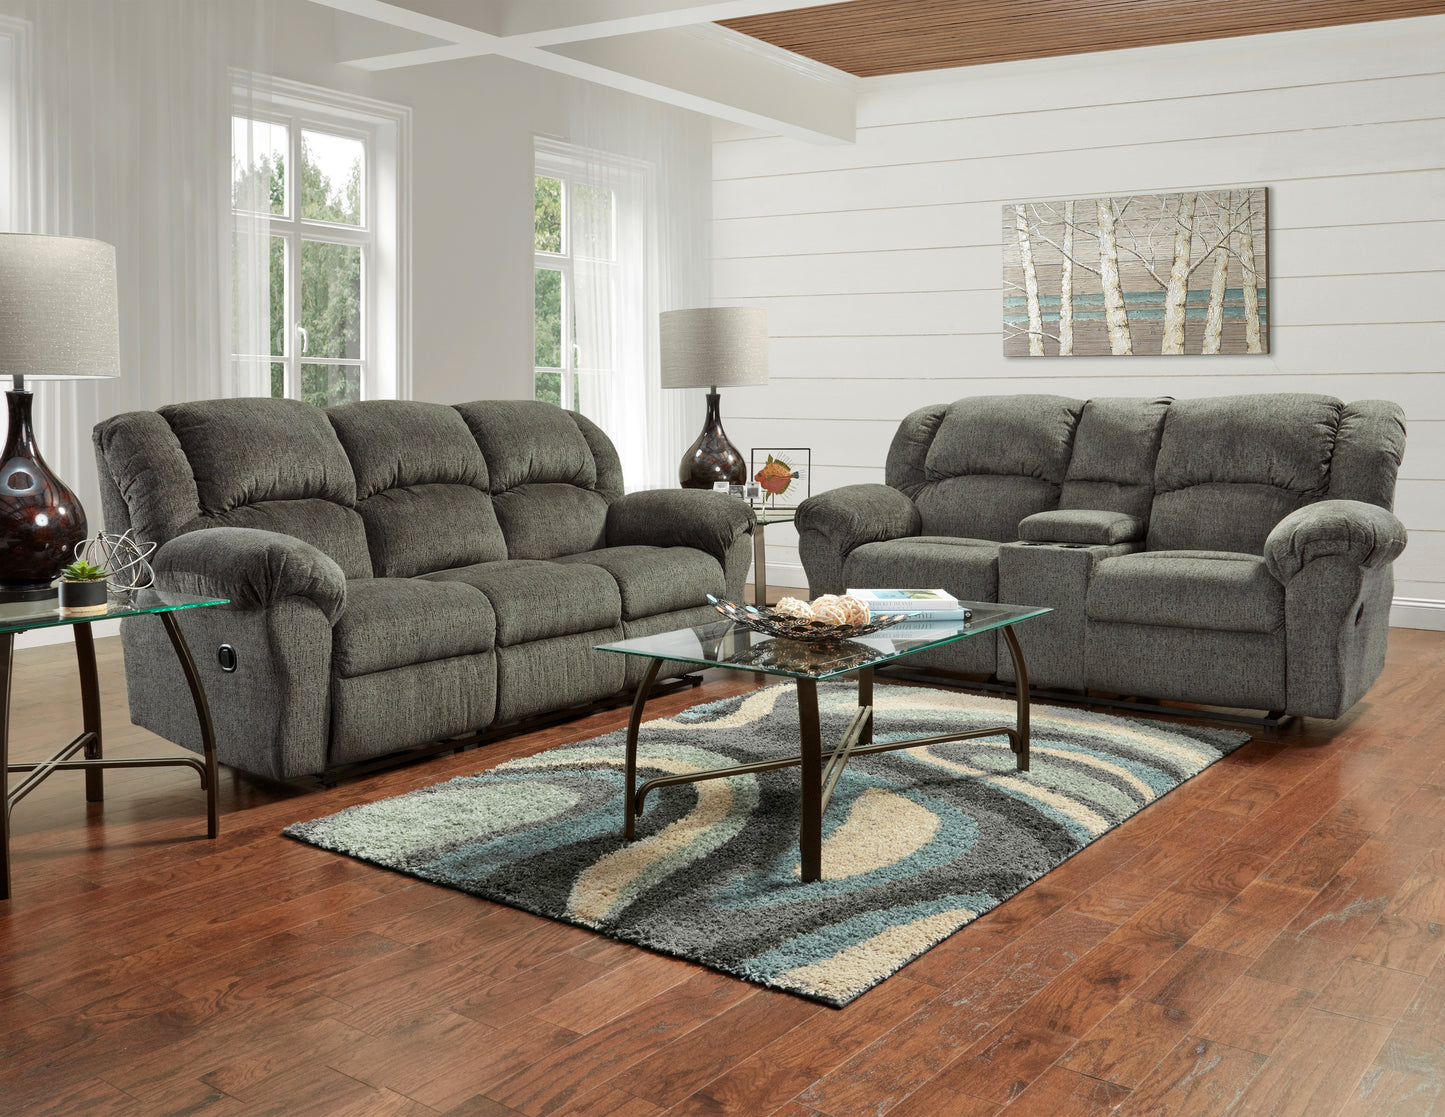 Dual Reclining Microfiber Living Room Collection, Allure Grey